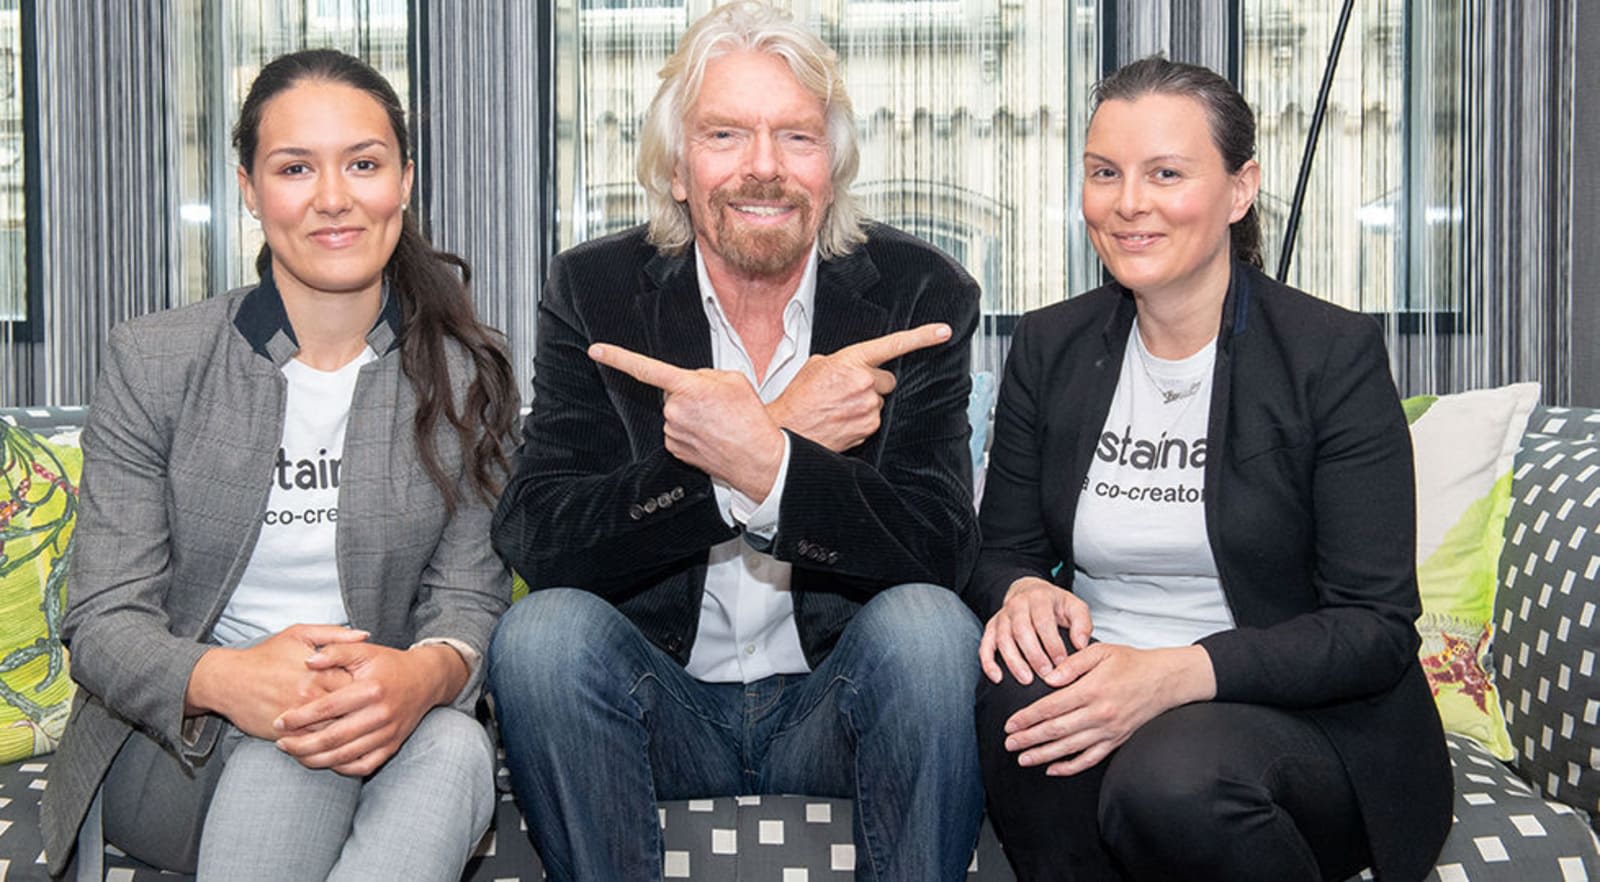 Richard Branson with the founders of the Sustainably app 